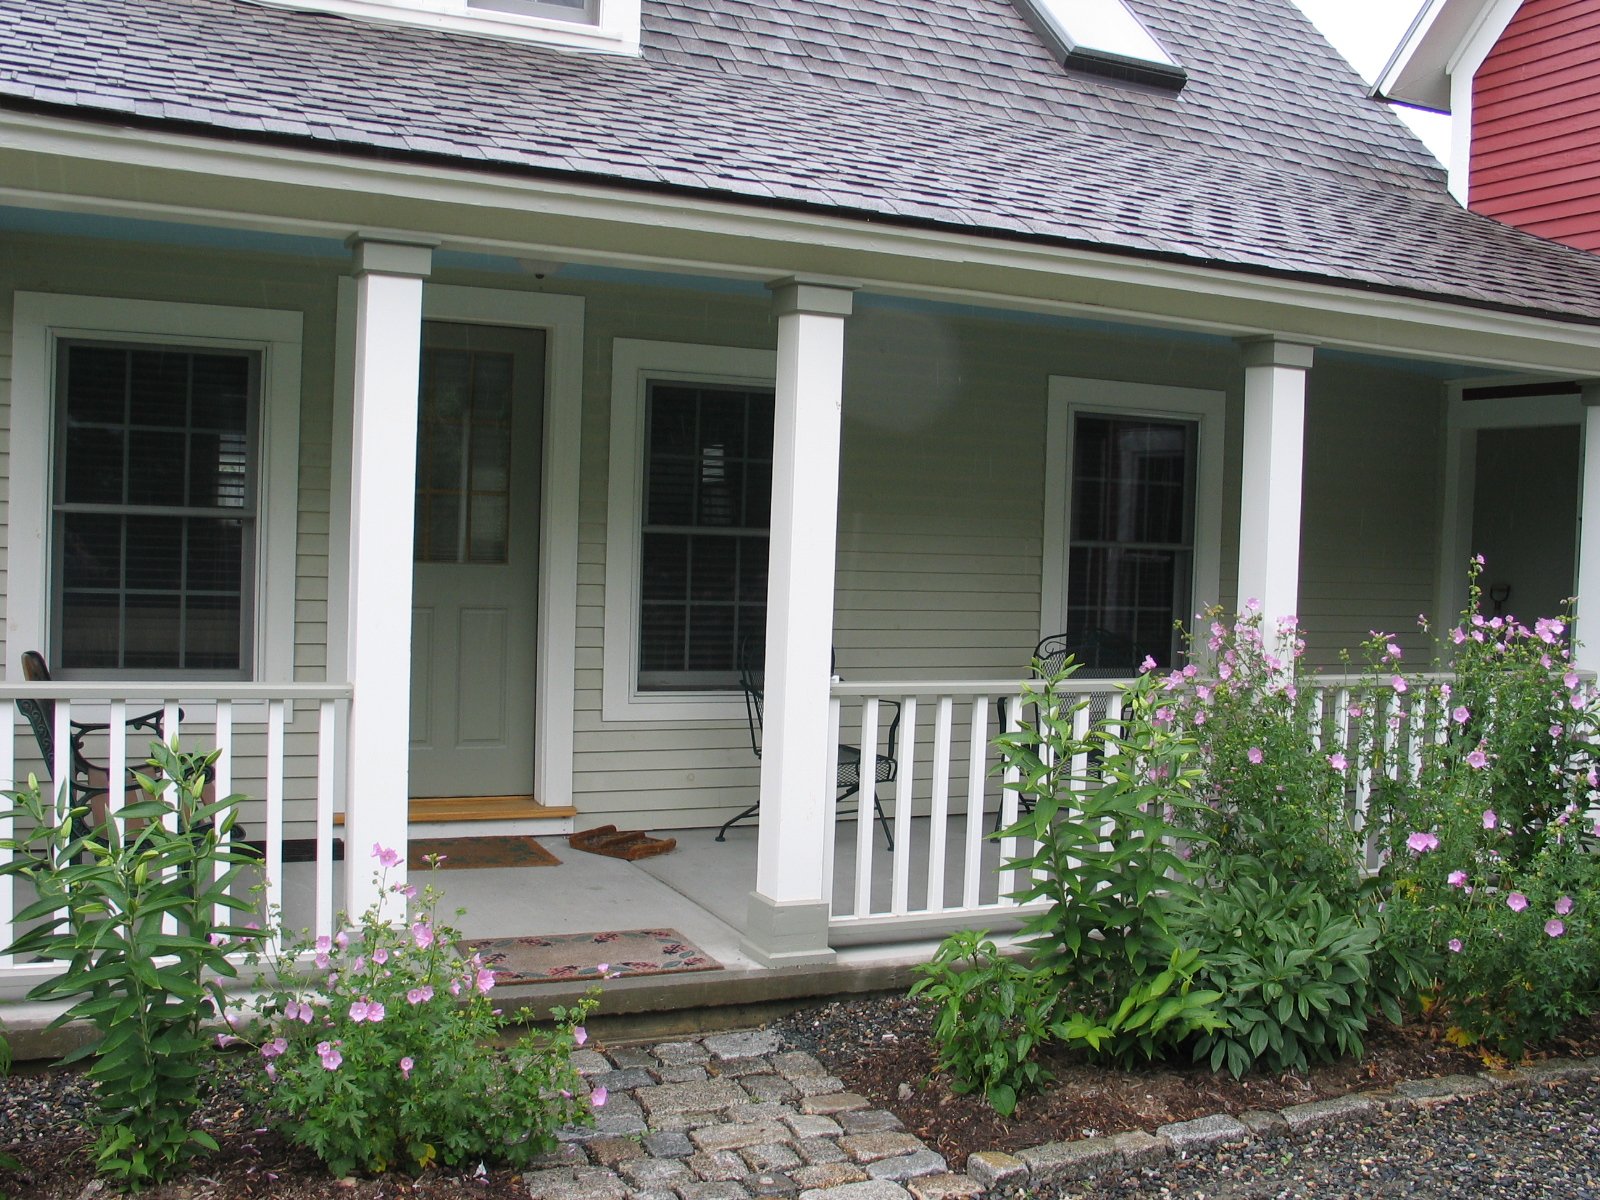 THE FRANCONIA COTTAGE